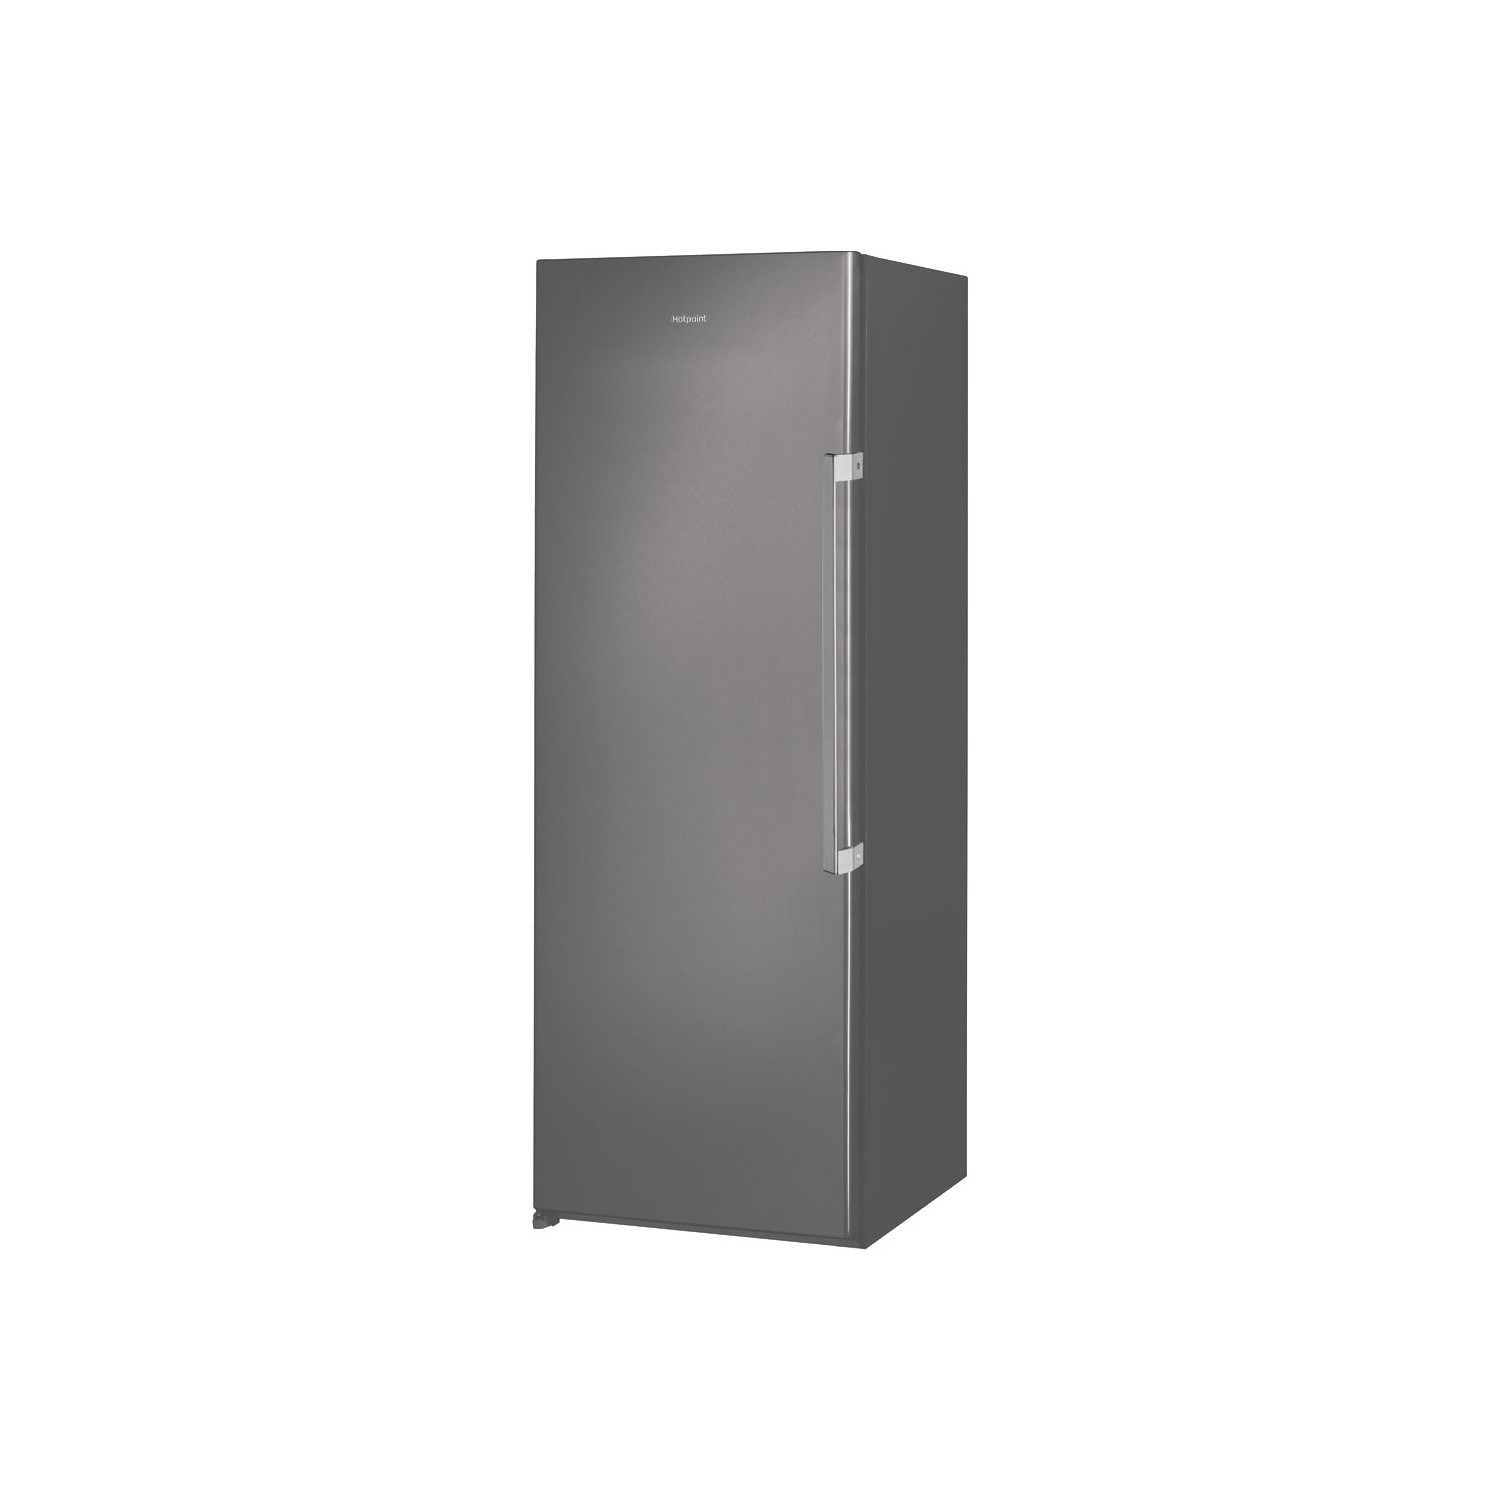 Refurbished Hotpoint UH6F1CG1 60cm Wide 167cm High Upright Freestanding Frost Free Freezer - Graphit